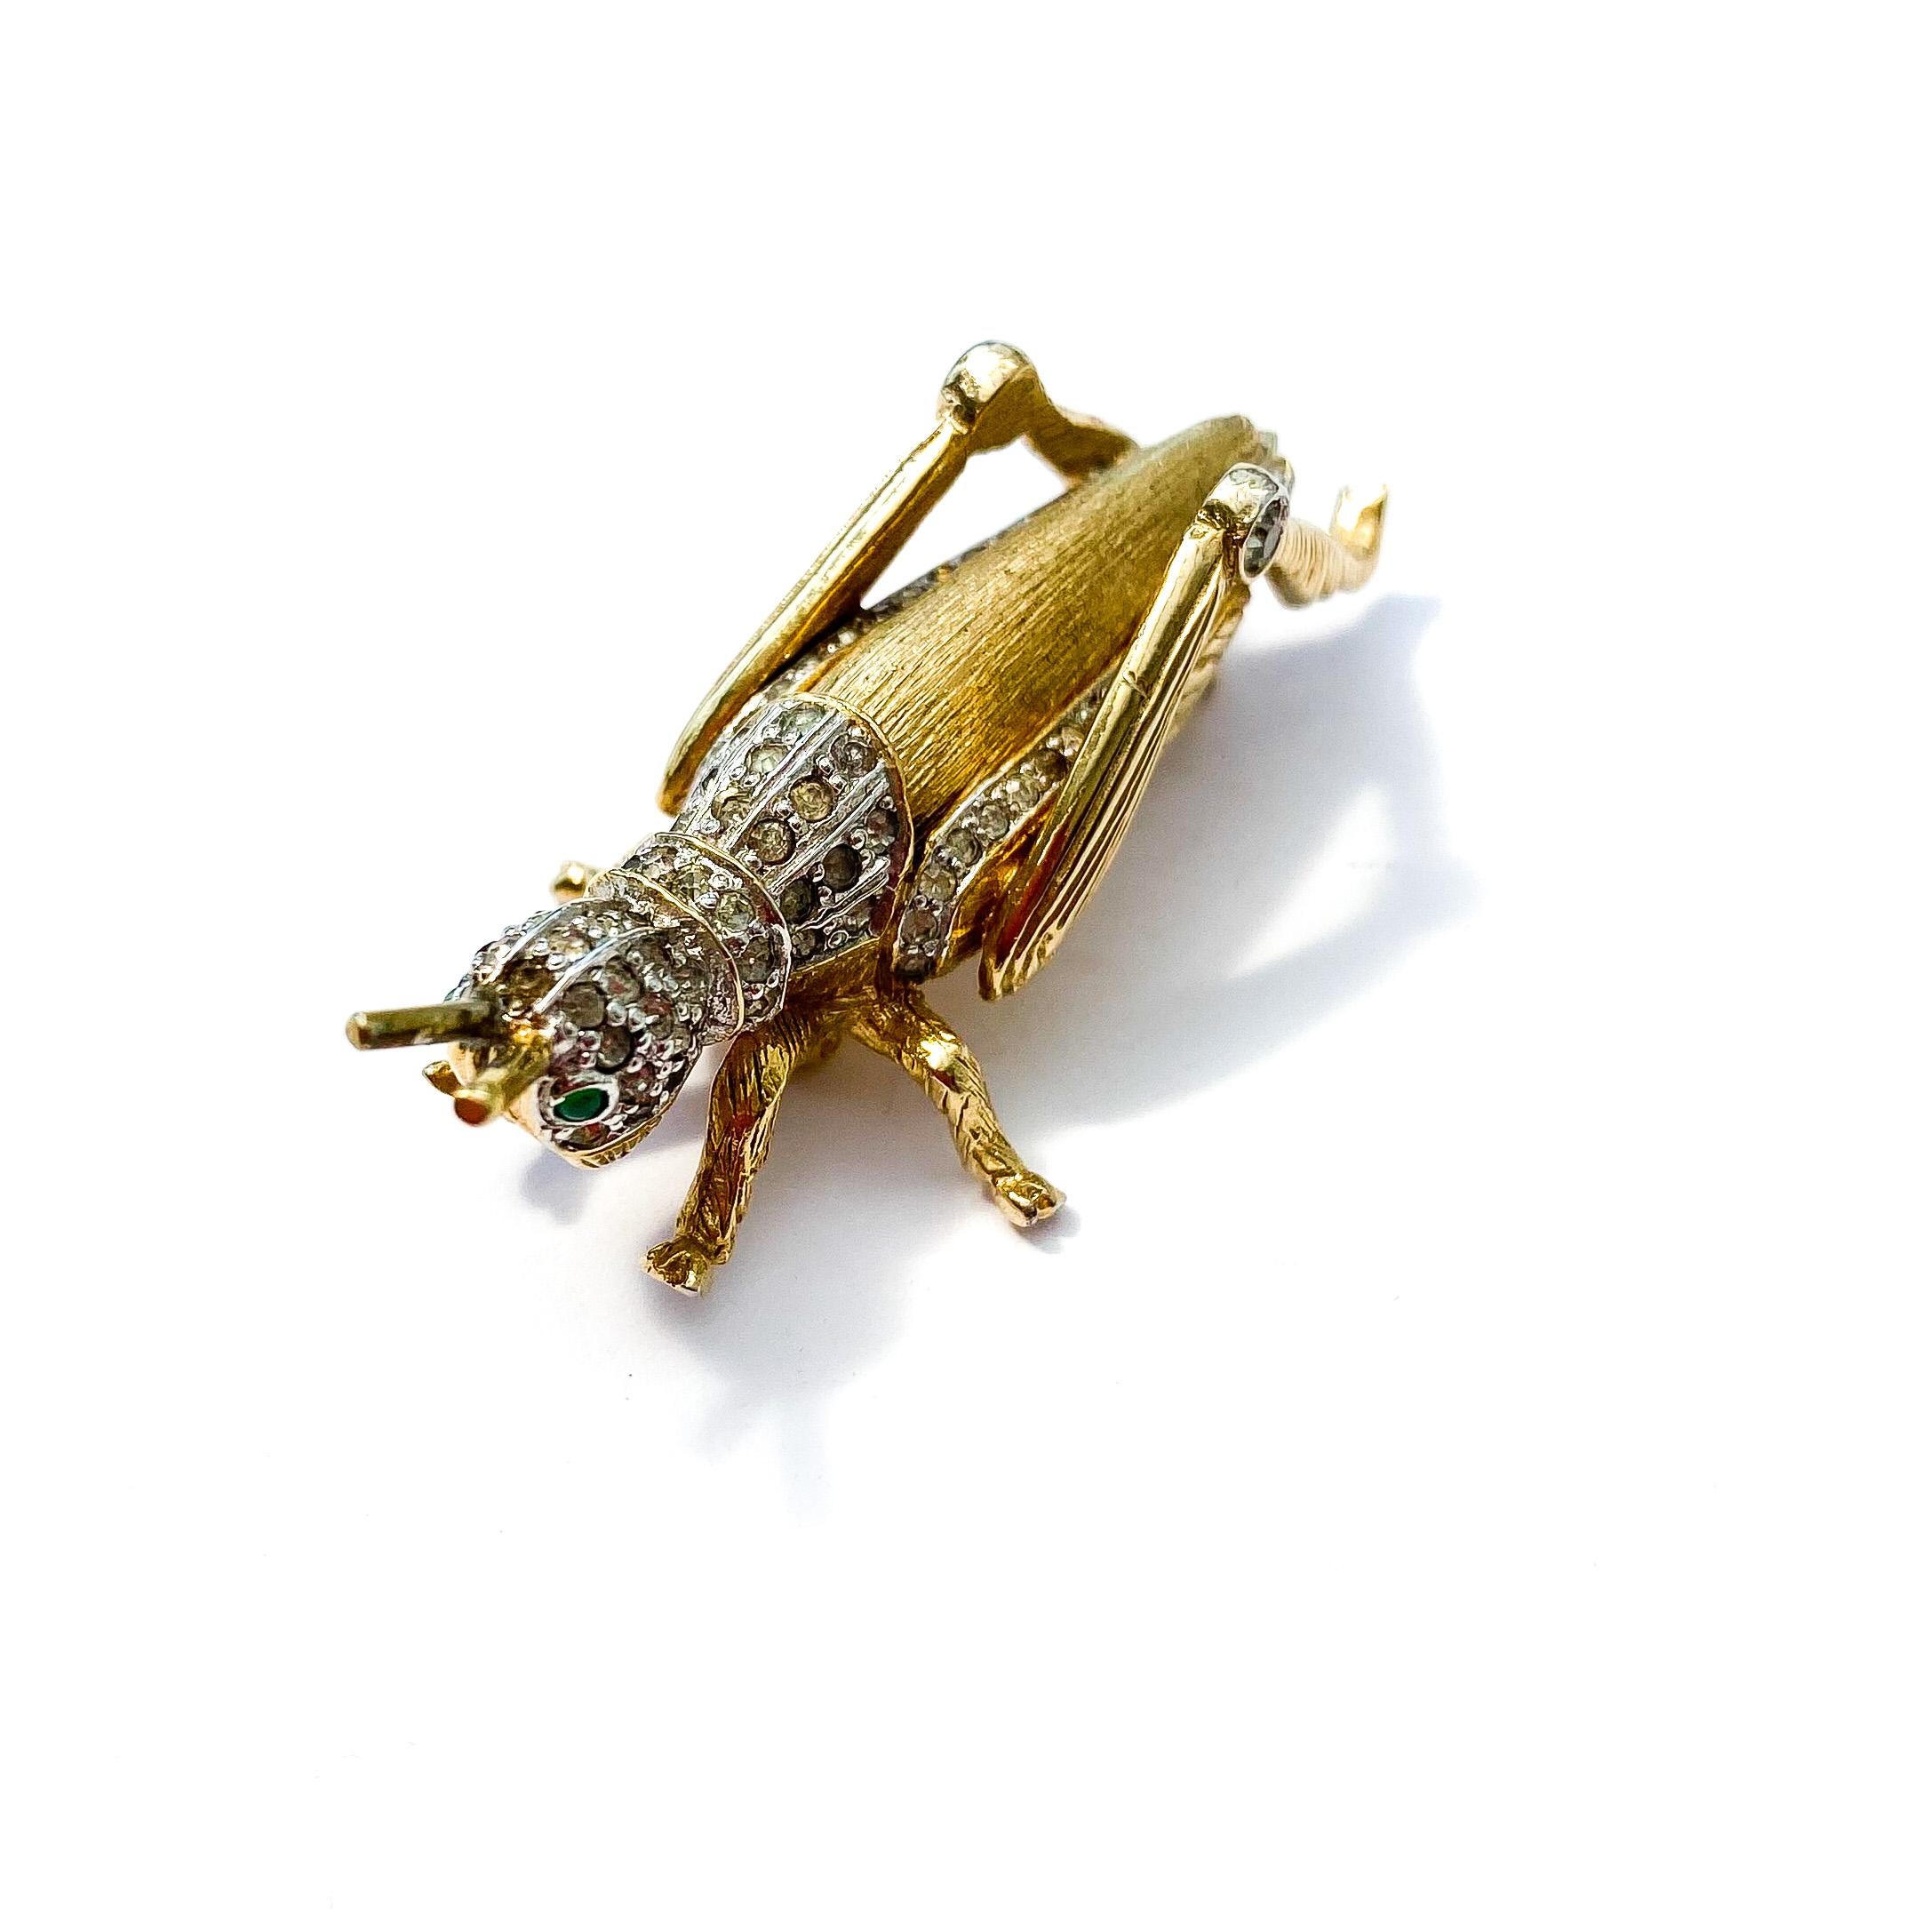 An exquisitely modelled three dimensional brooch in the form of a grasshopper, from mid century American fashion designer , Nettie Rosenstein. Of outstanding quality, this brooch depicts this insect beautifully, charming to look and and to wear. Pin